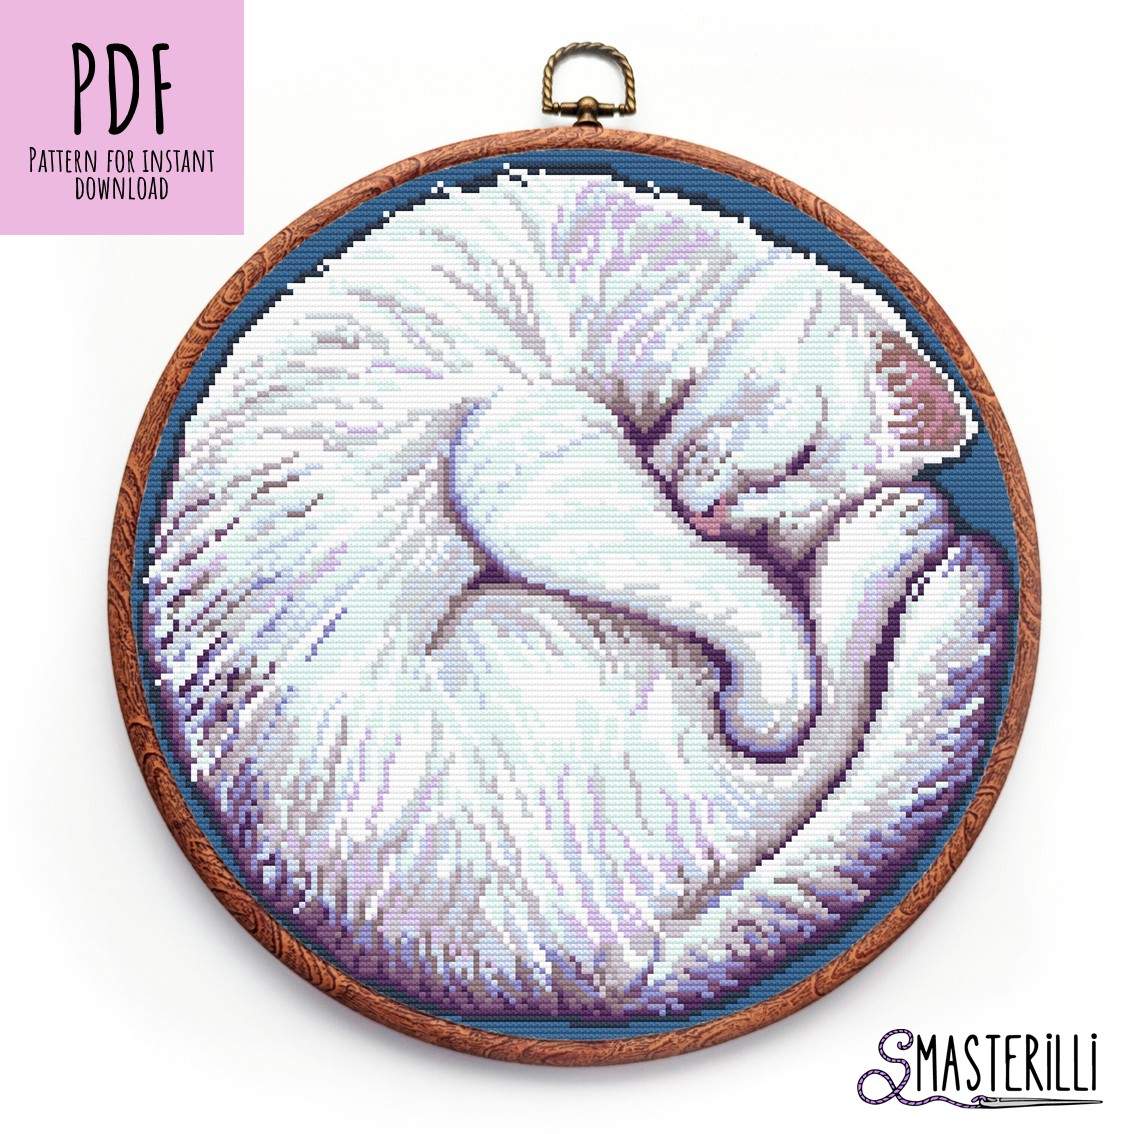 Create a stunning cross stitch with this adorable sleeping white cat pattern by Smasterilli. Perfect for any pet lover or cross-stitching enthusiast, this curved-up cat design is sure to be a hit. Get it now and start stitching today!